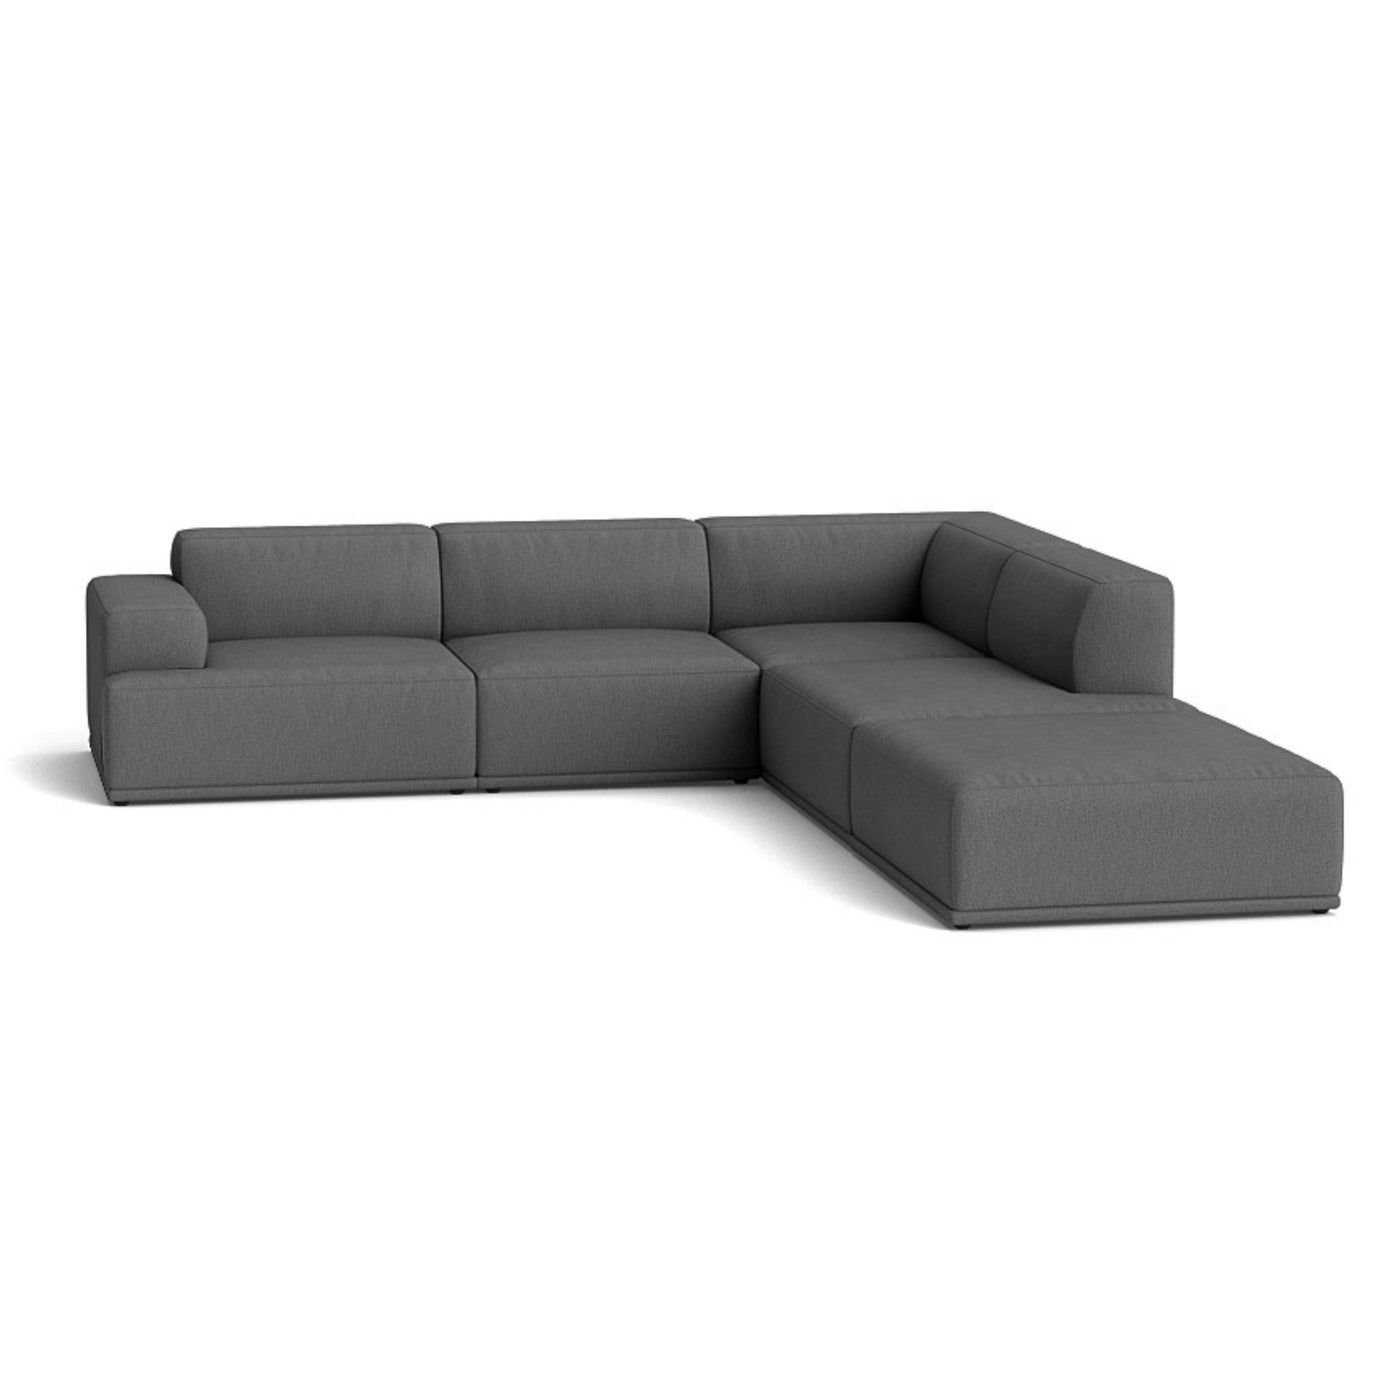 Muuto Connect Soft Modular Corner Sofa, configuration 2. Made-to-order from someday designs. #colour_clay-13